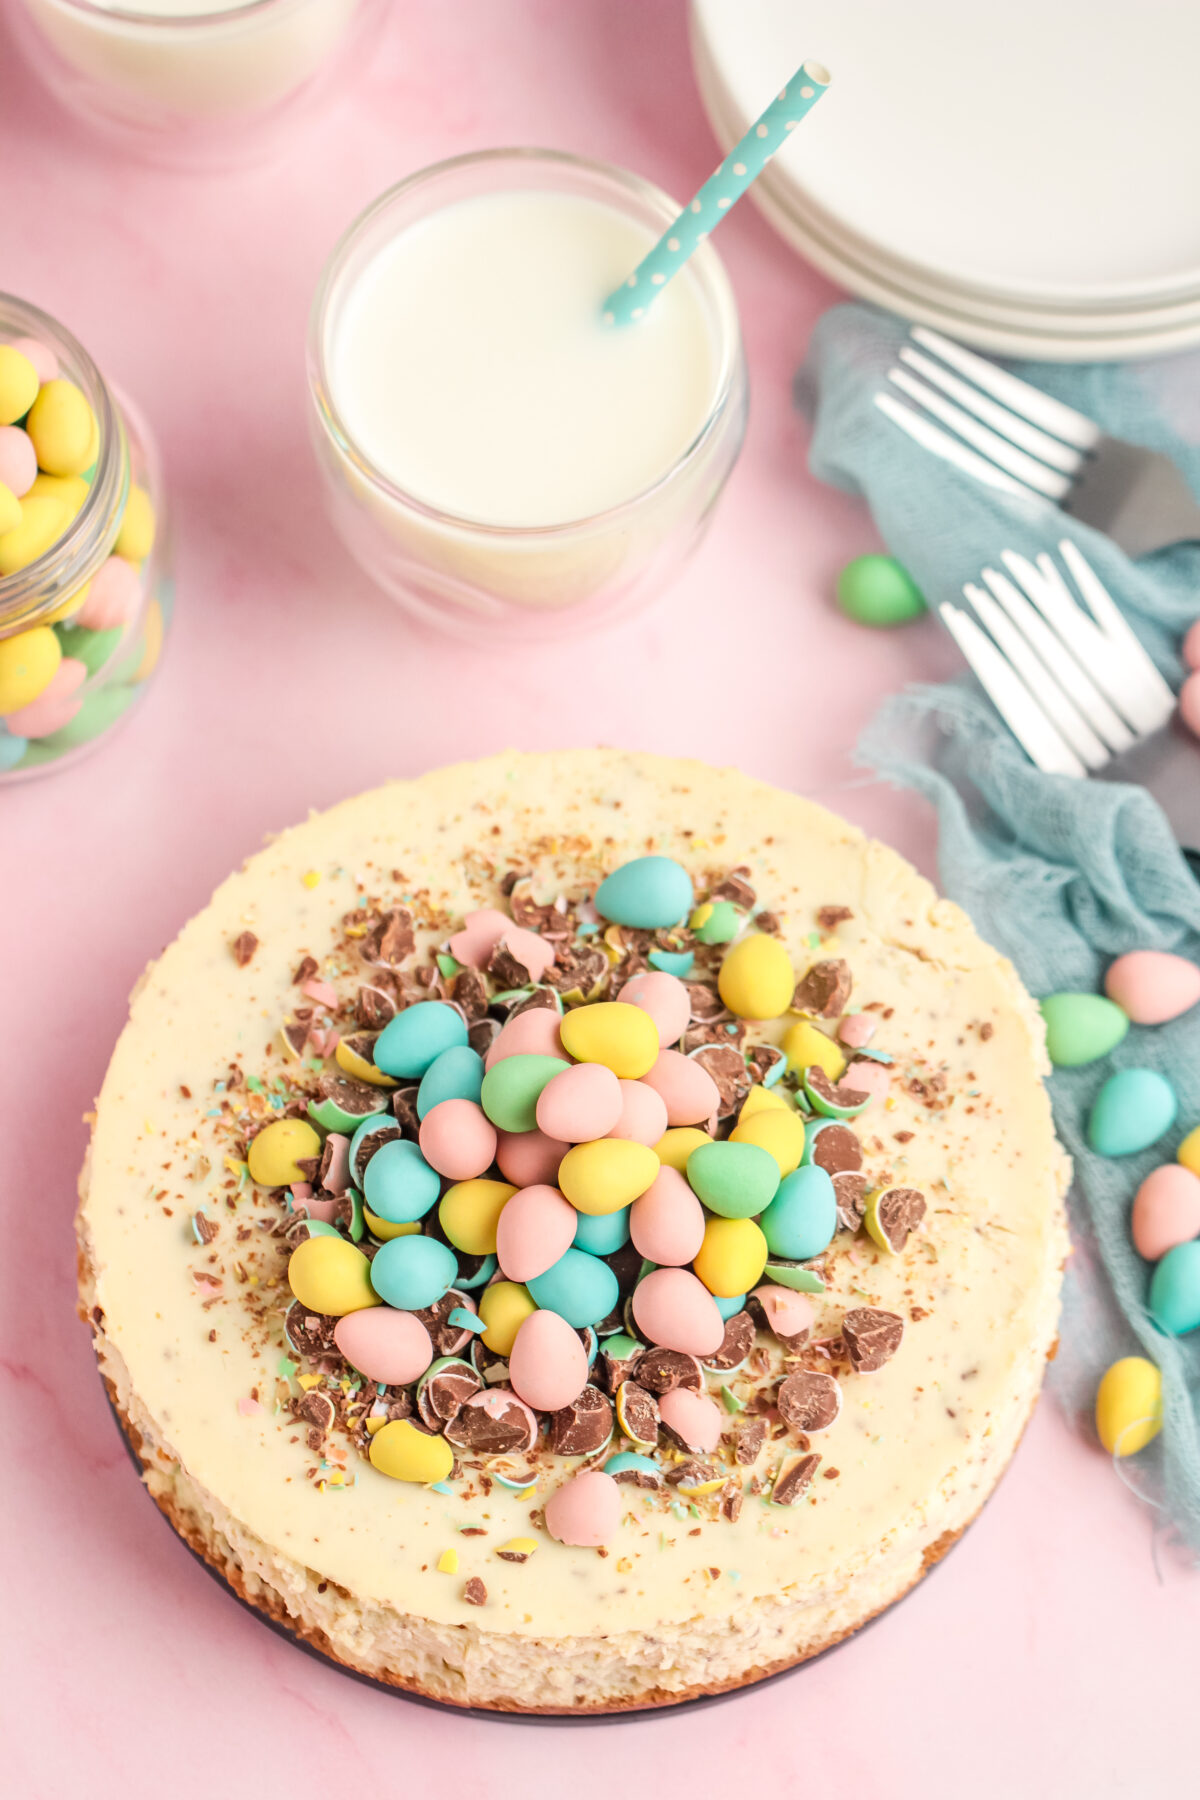 Looking for an easy and delicious Instant Pot cheesecake recipe for Easter? Out Instant Pot Mini Egg Cheesecake is a perfect spring dessert!